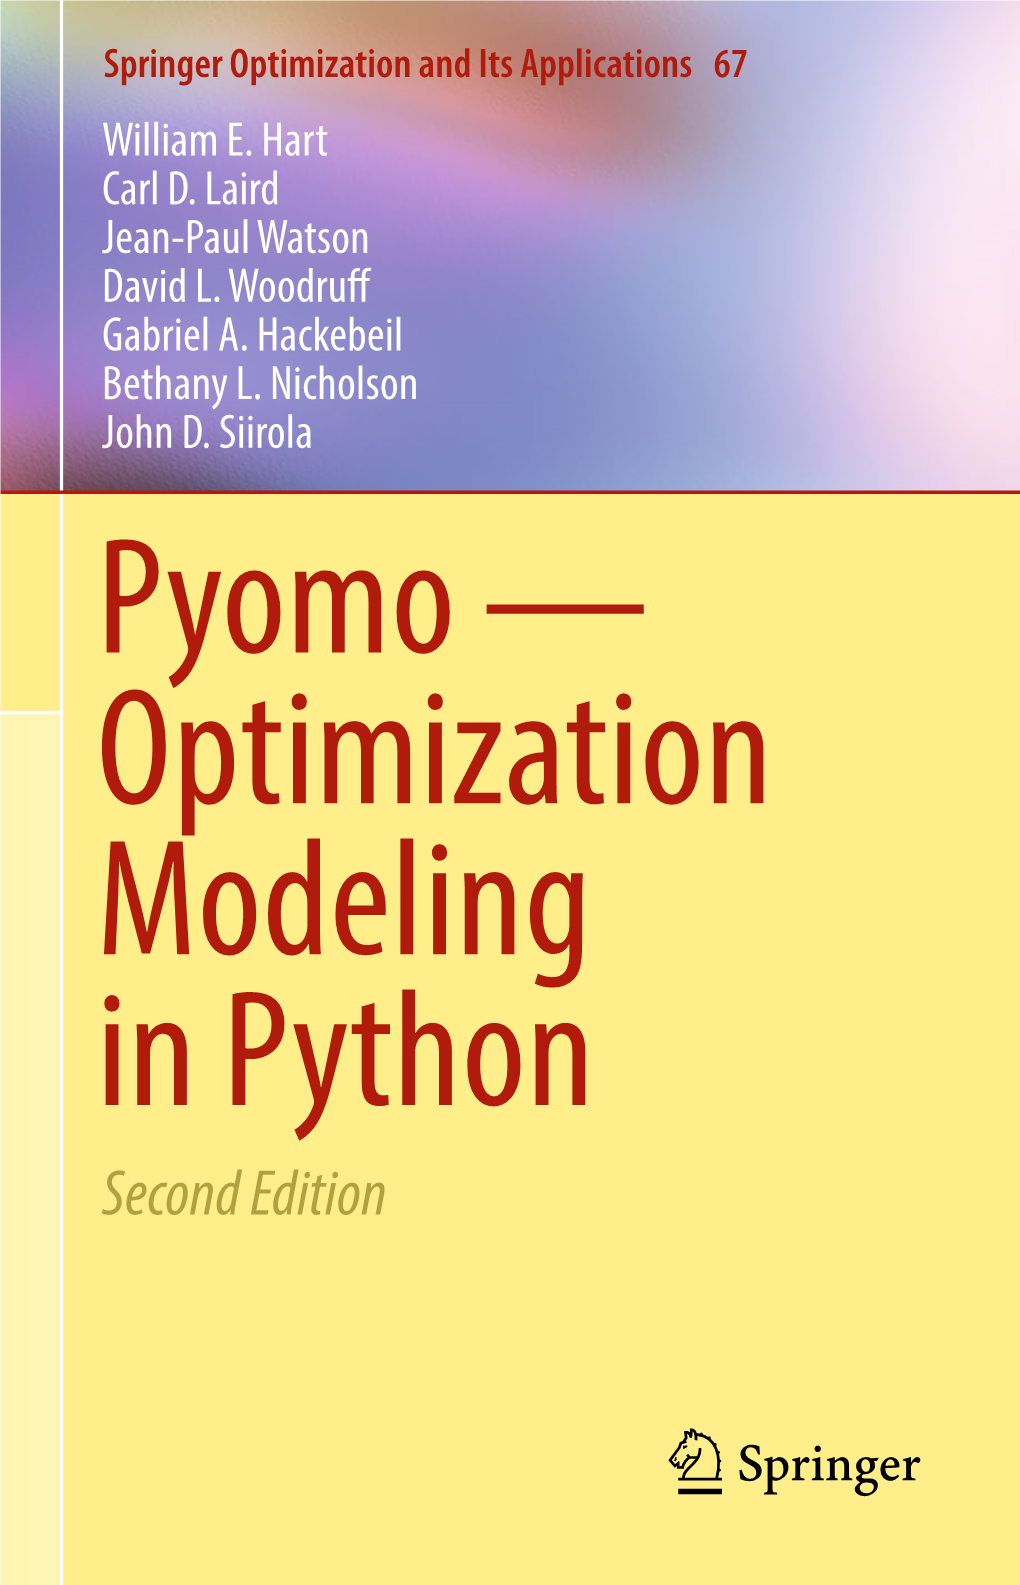 Pyomo — Optimization Modeling in Python Second Edition Springer Optimization and Its Applications